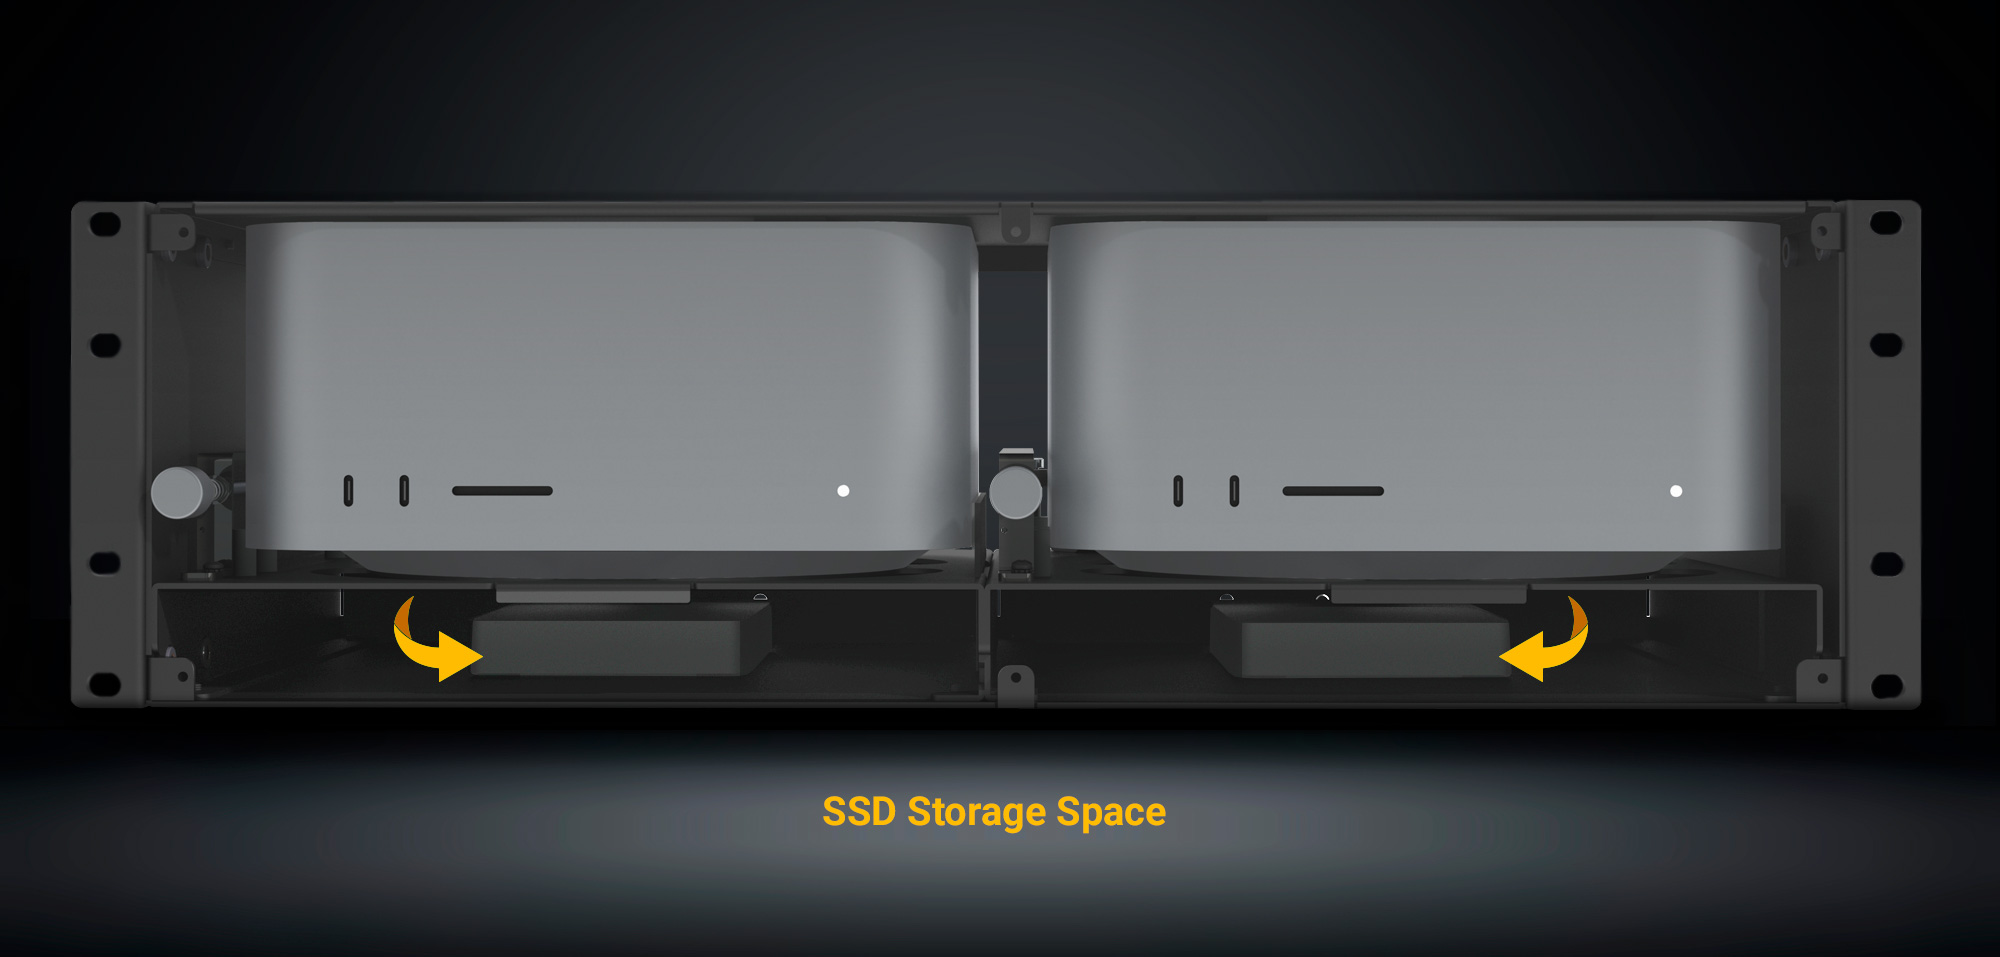 RackMac Studio without Front Panel Showing Location of Installed SSD Drives In Accessory Spaces